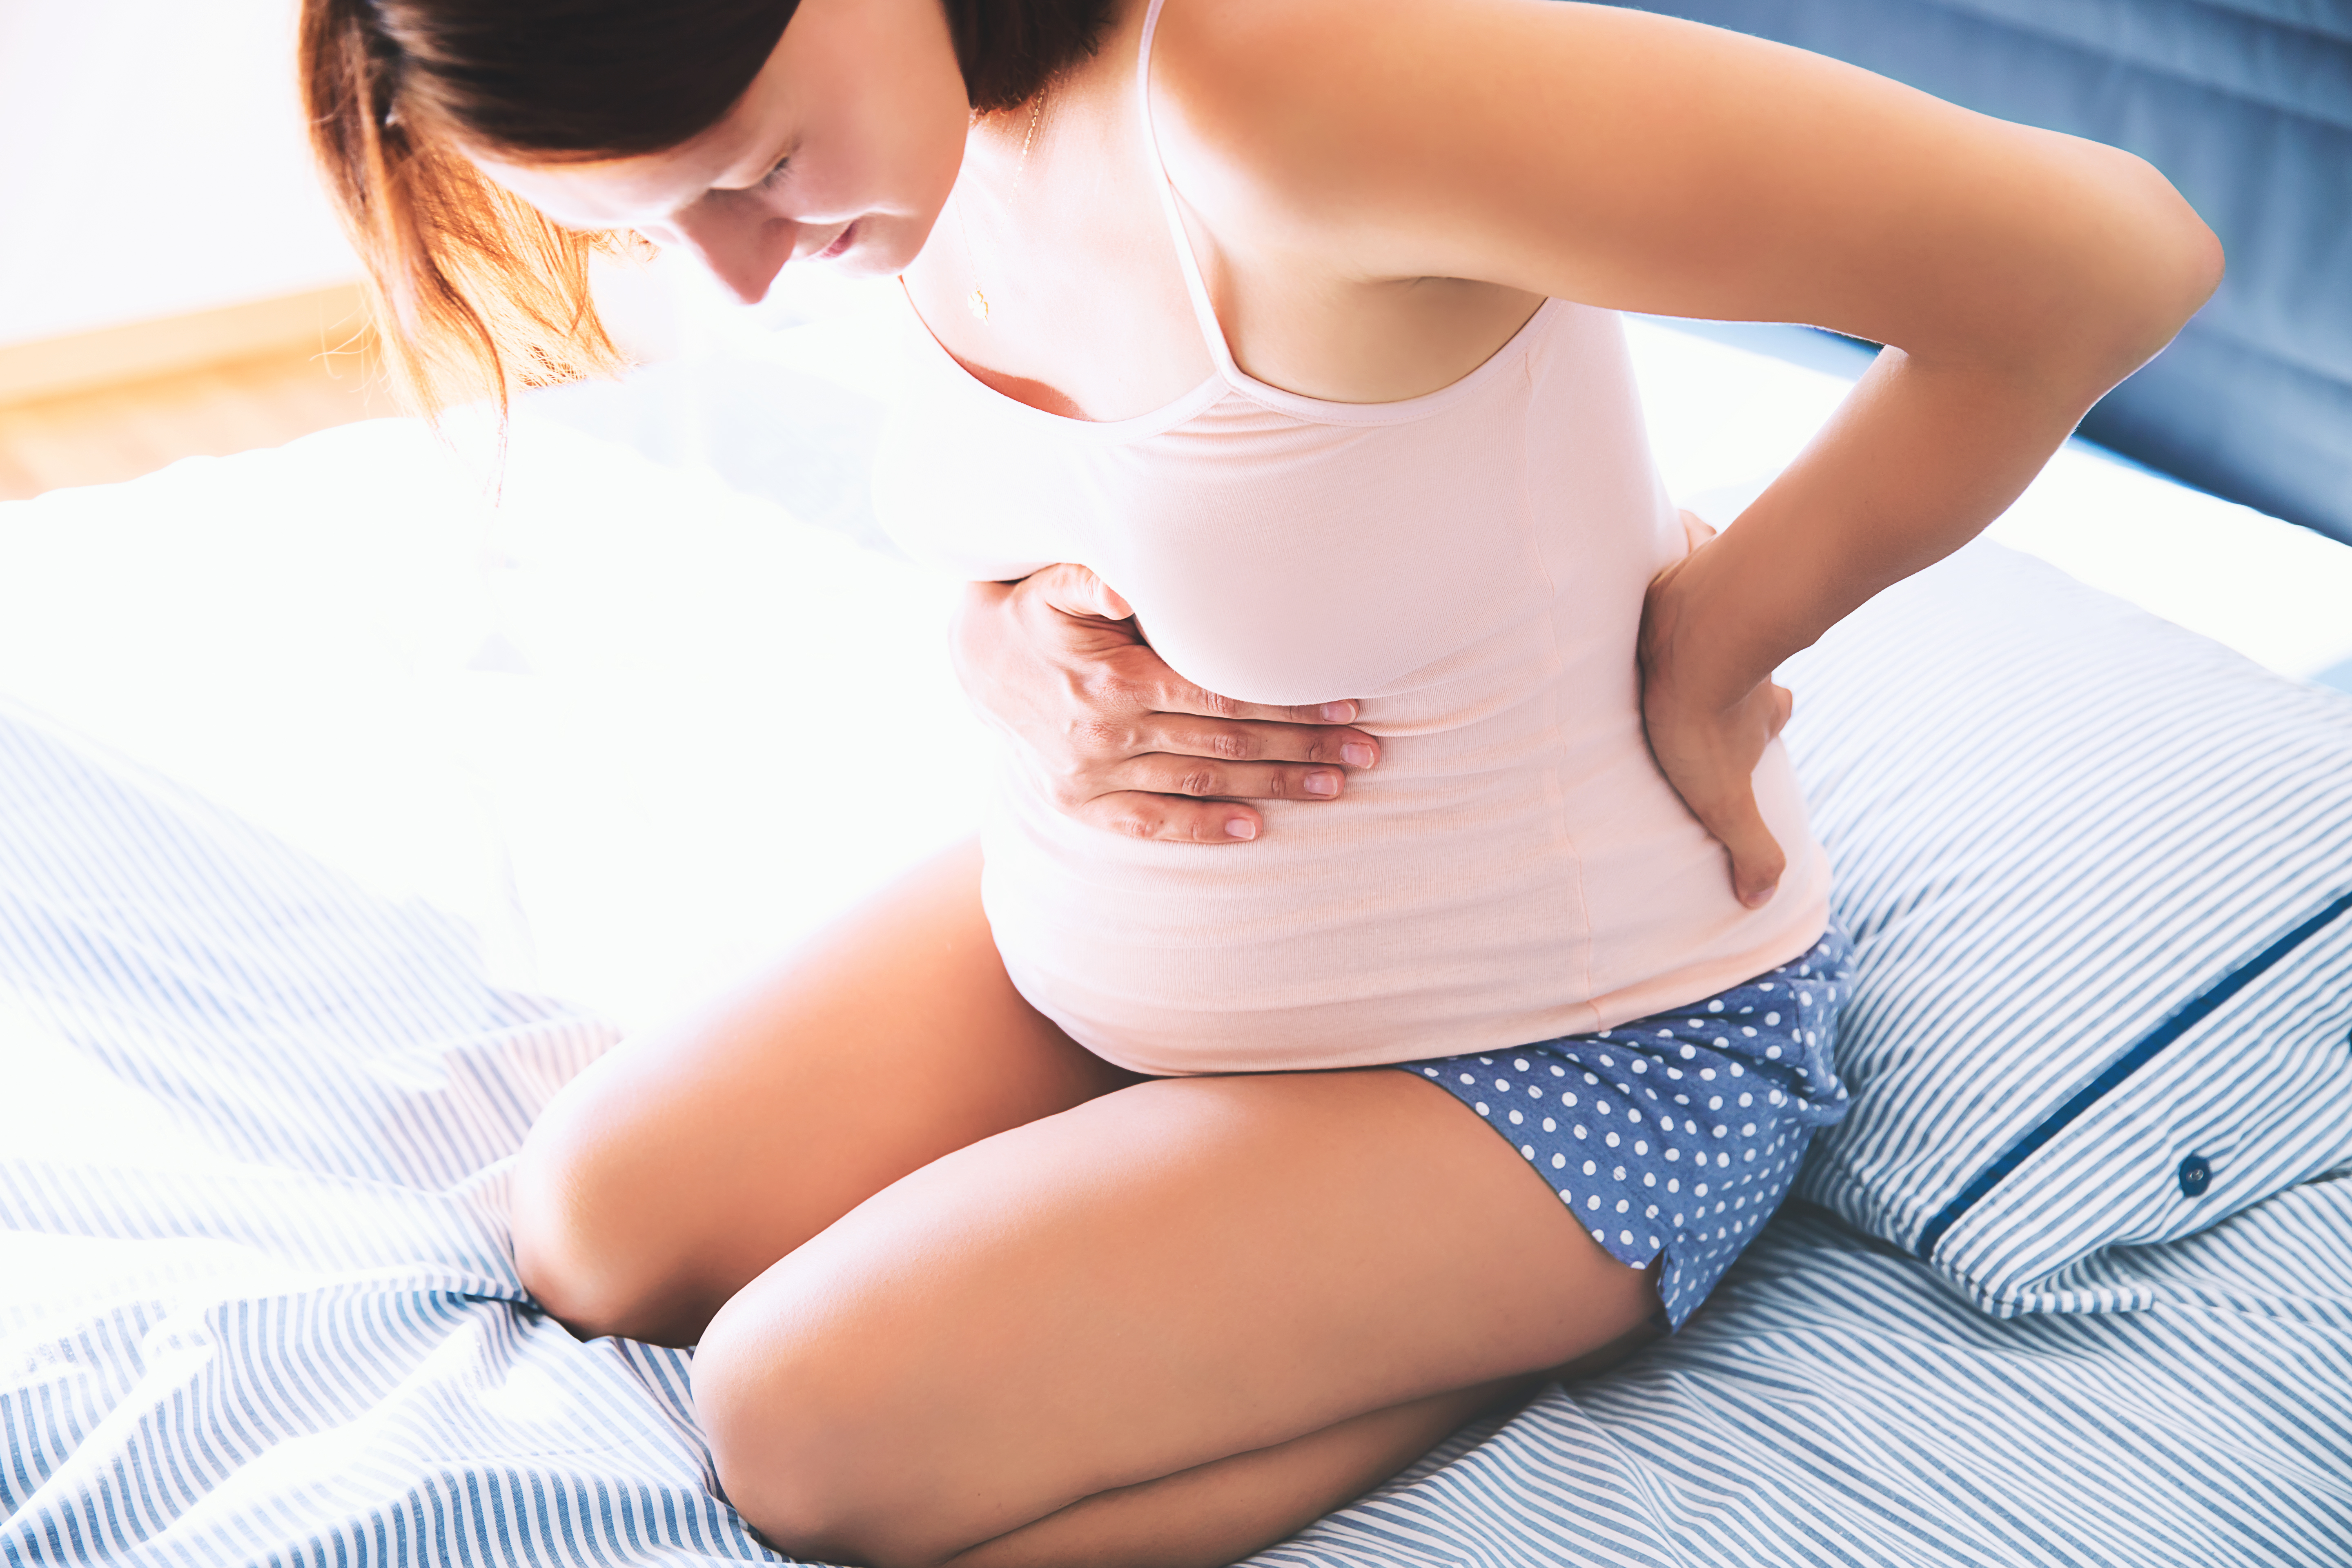 A pregnant woman in pain | Source: Shutterstock